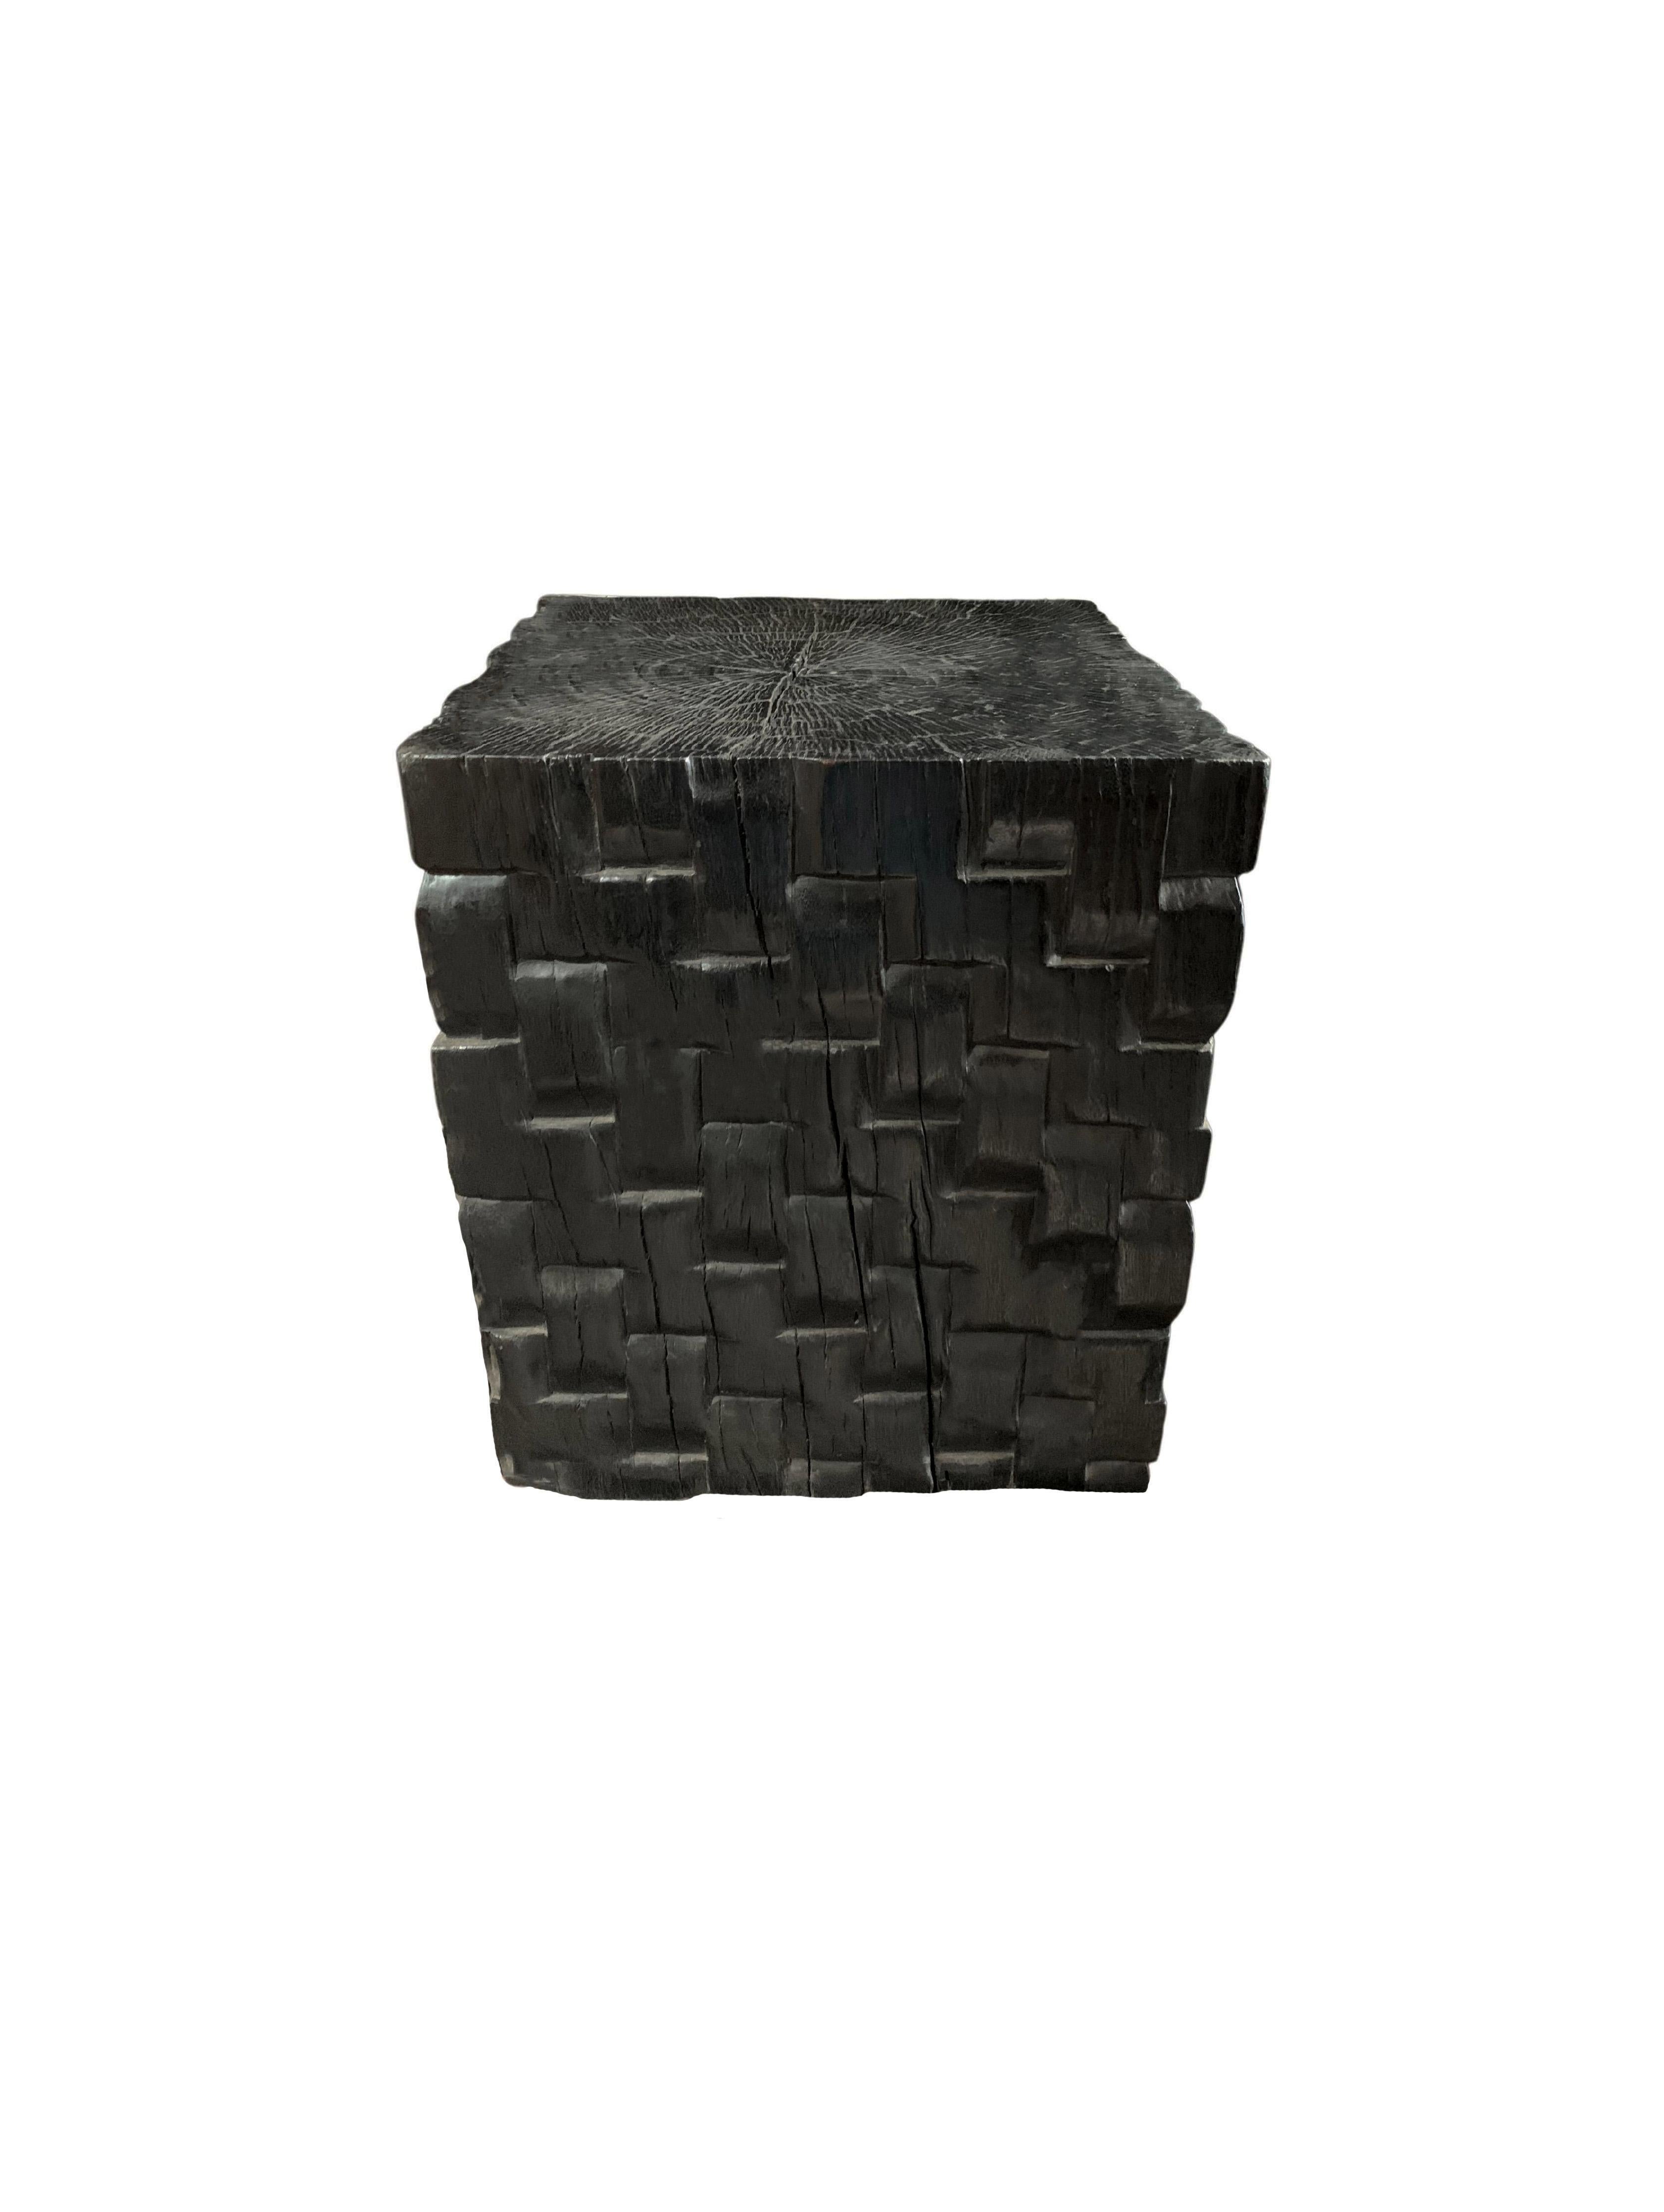 A wonderfully sculptural side table with a woven pattern hand-carved on four sides. Its rich black pigment was achieved through burning the wood three times. Its neutral pigment and subtle wood texture makes it perfect for any space. A uniquely